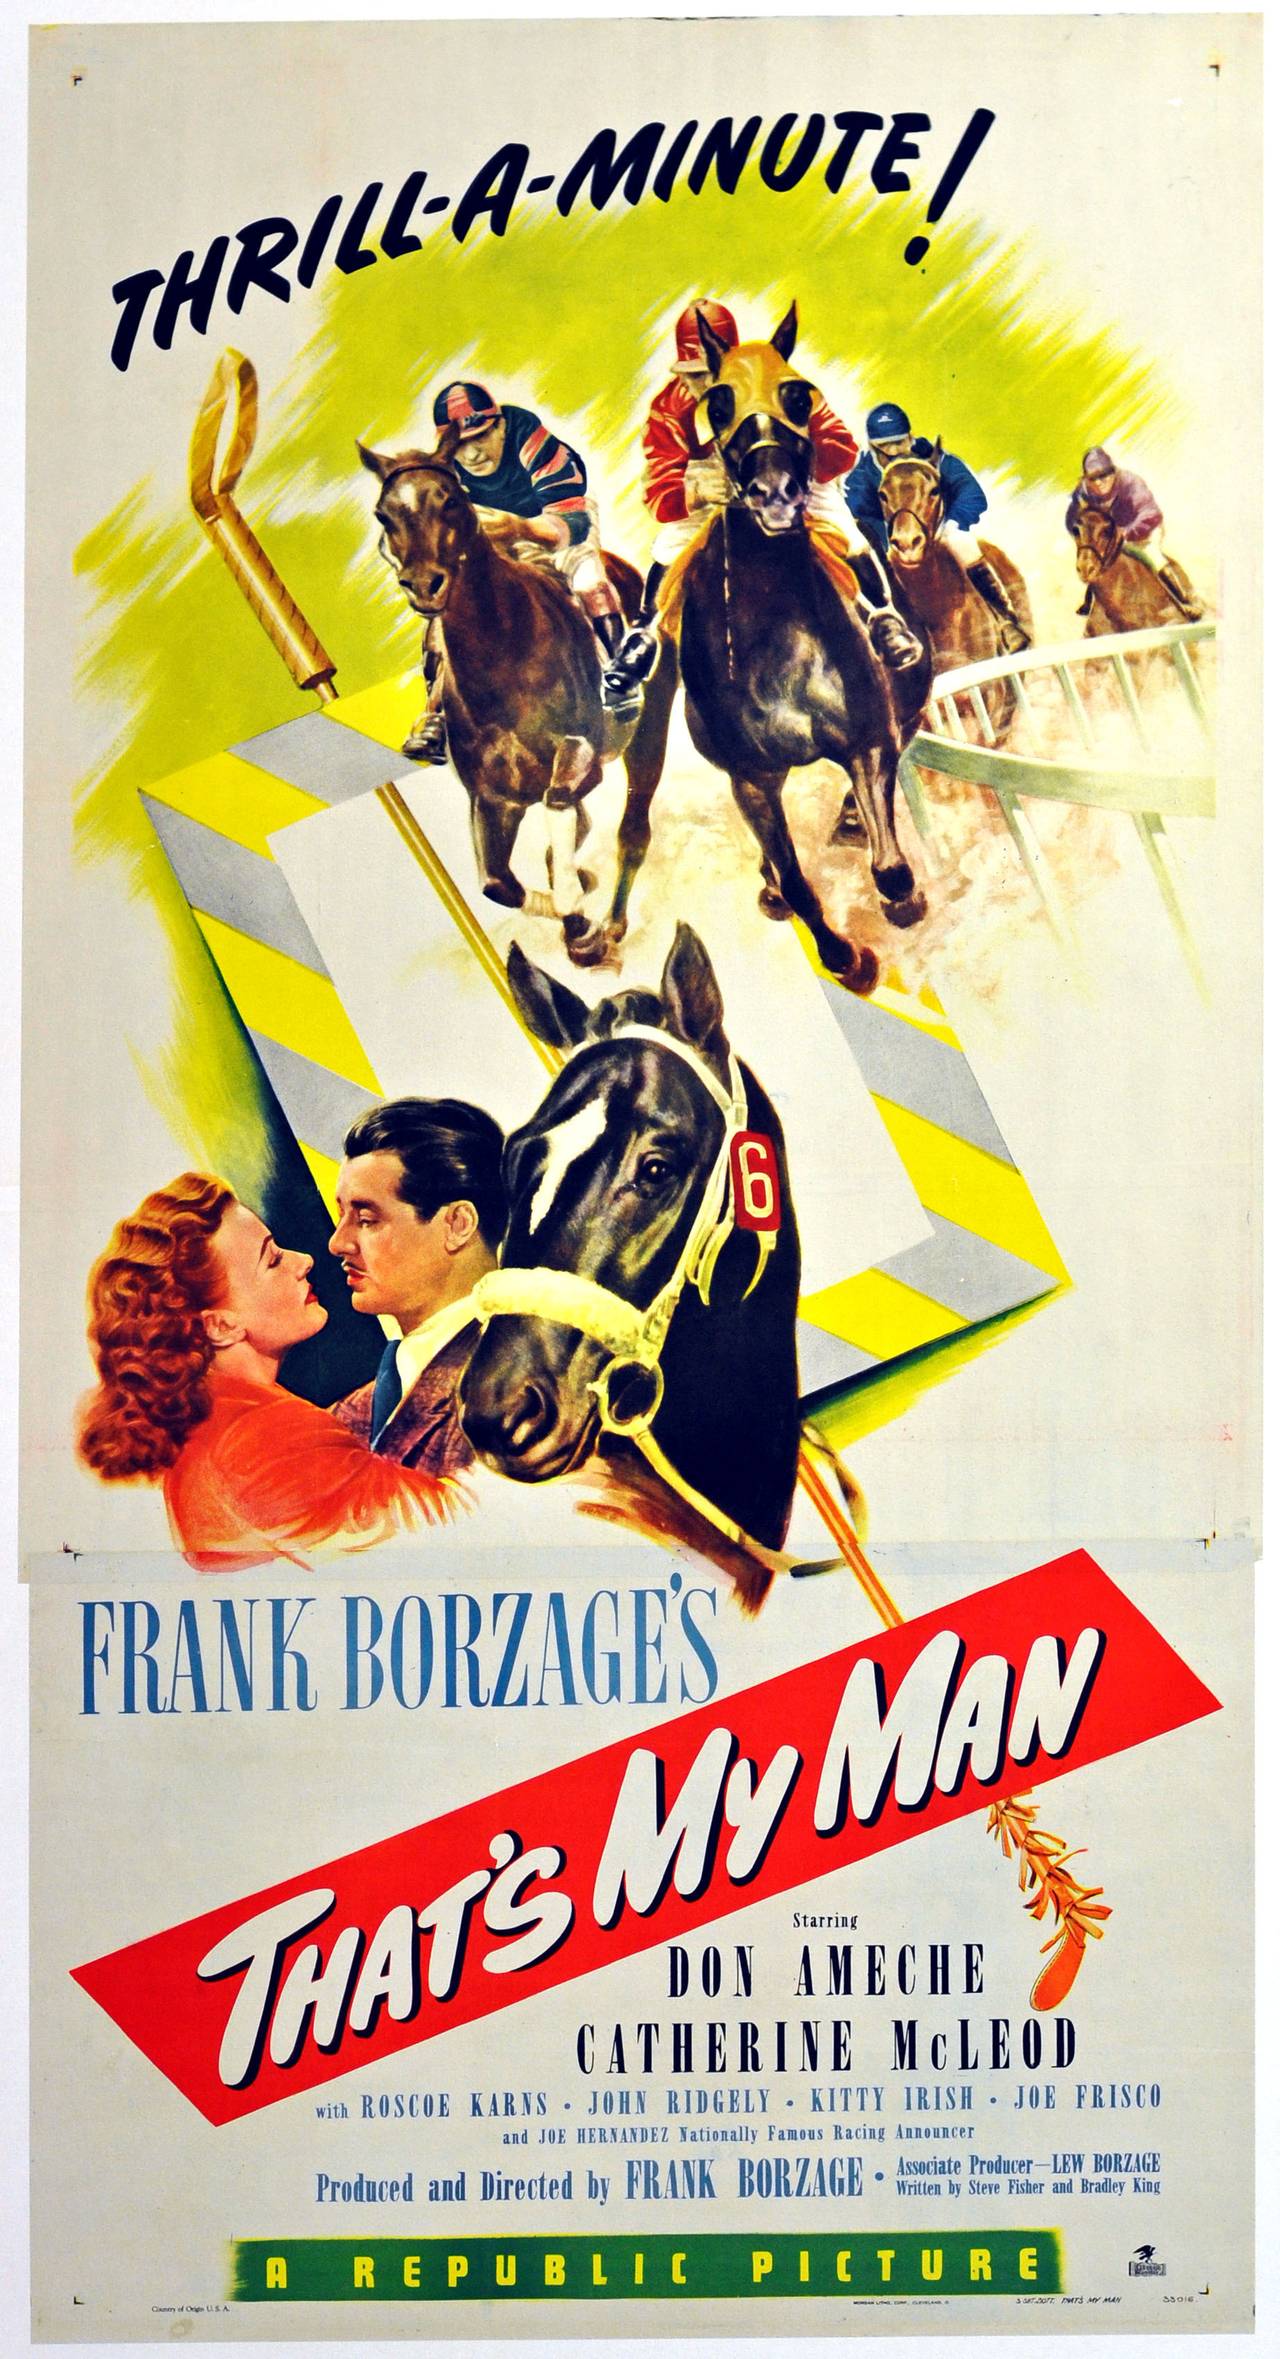 Unknown Print - Original Vintage 1947 Movie Poster For A Horse Racing Film, That's My Man